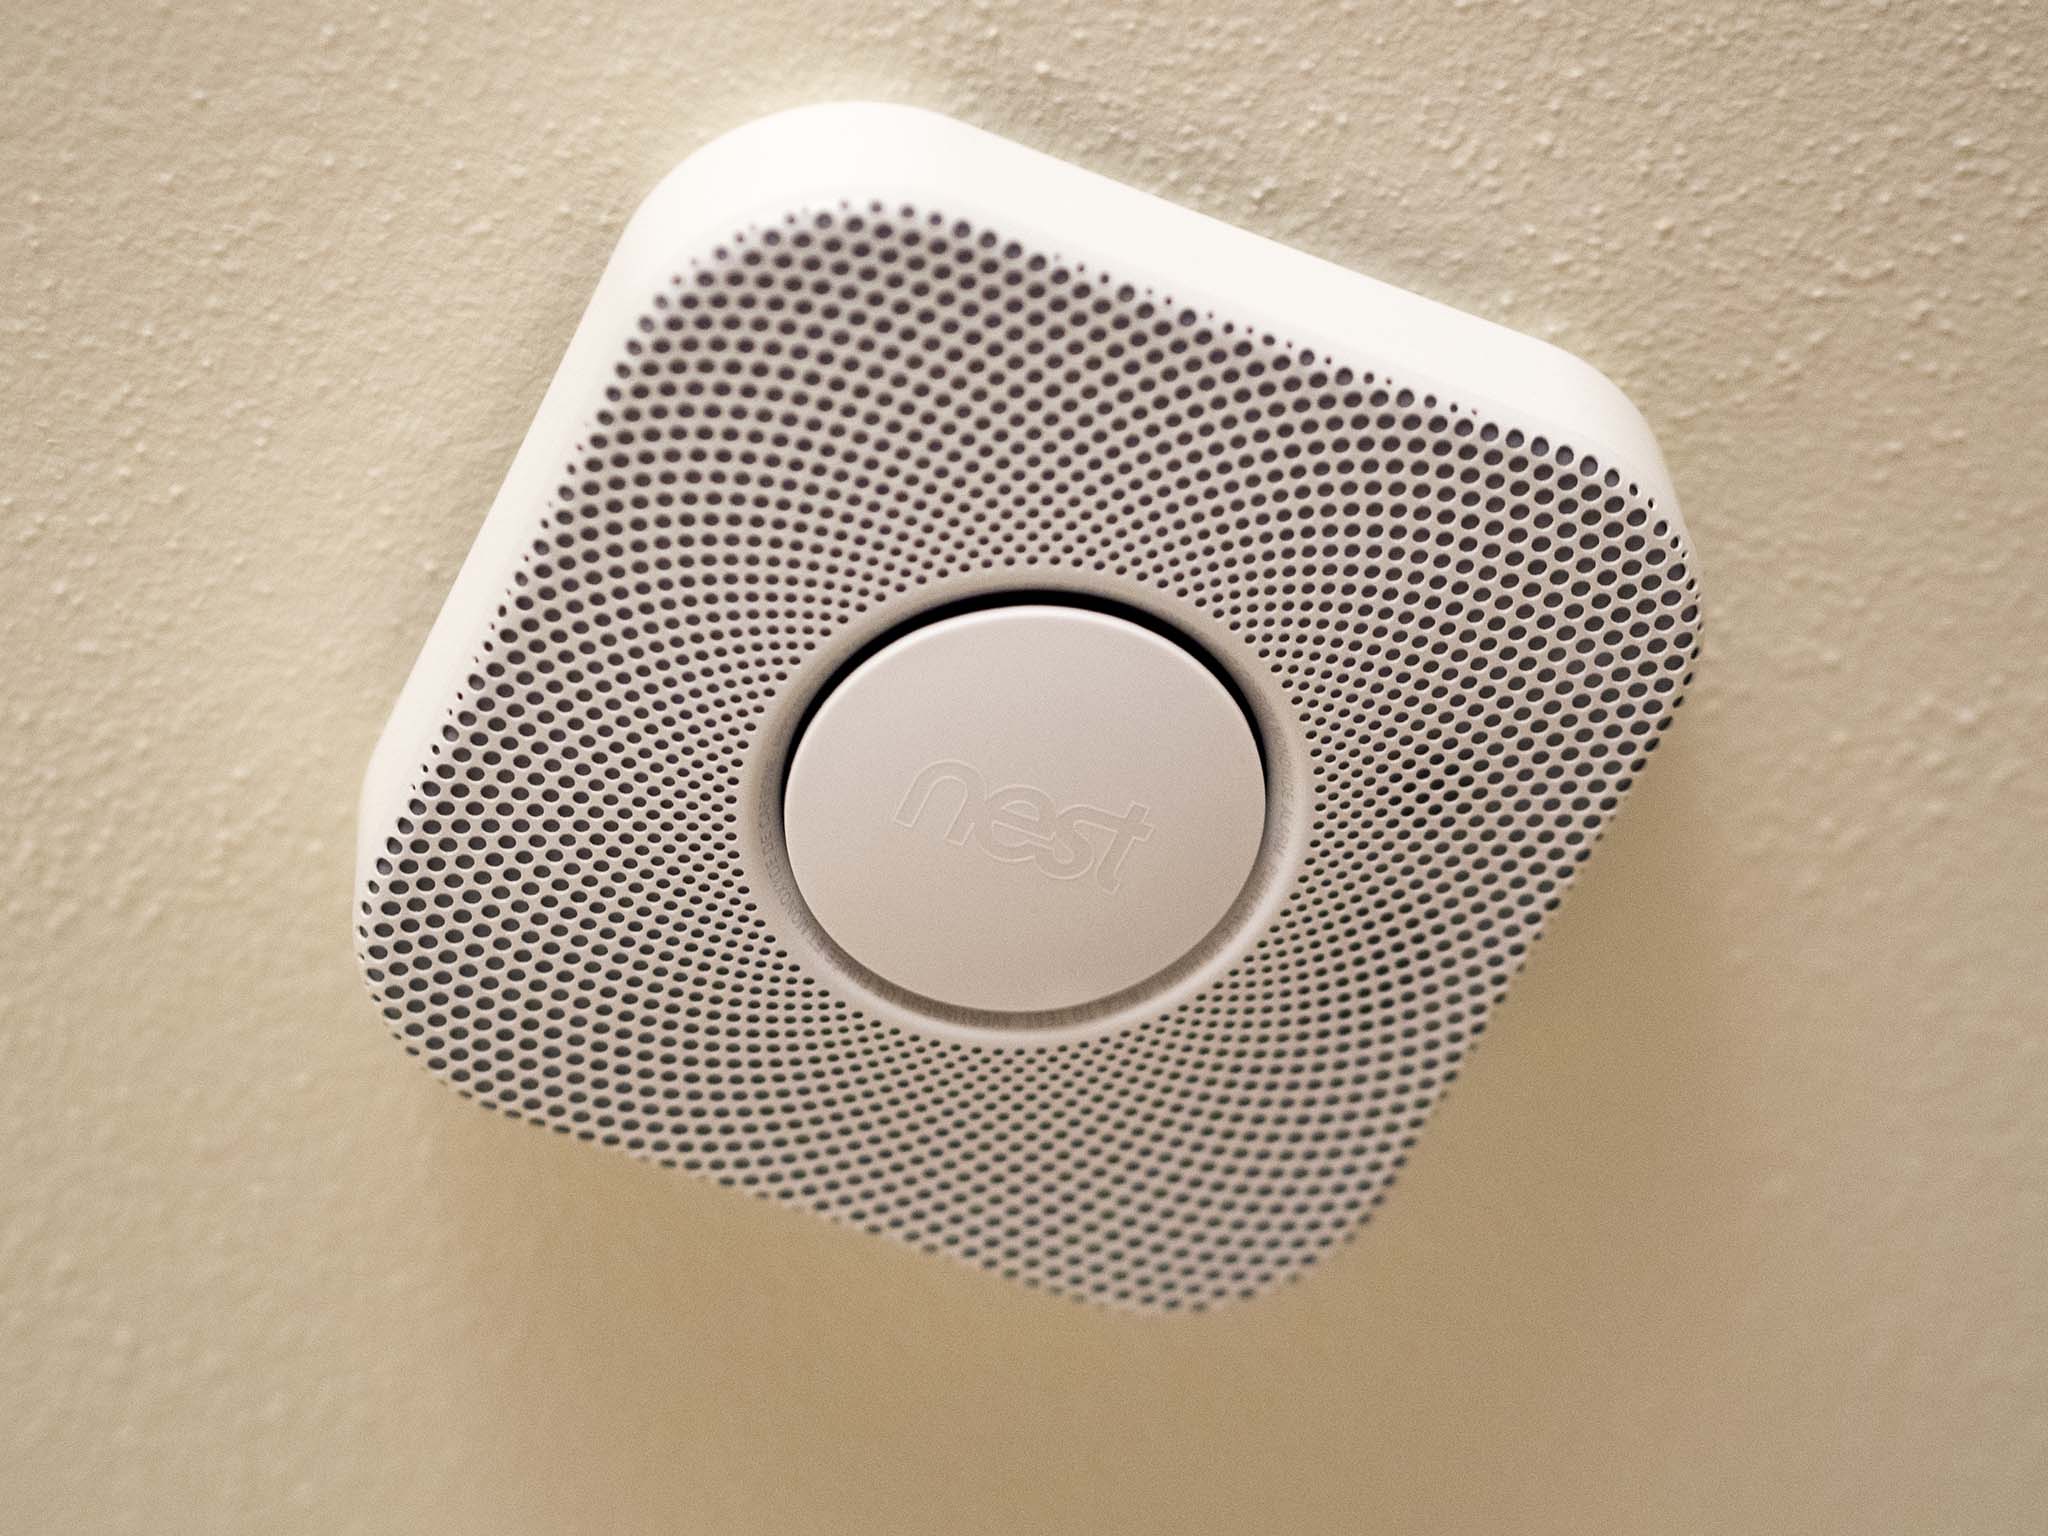 How long does Nest Protect last?